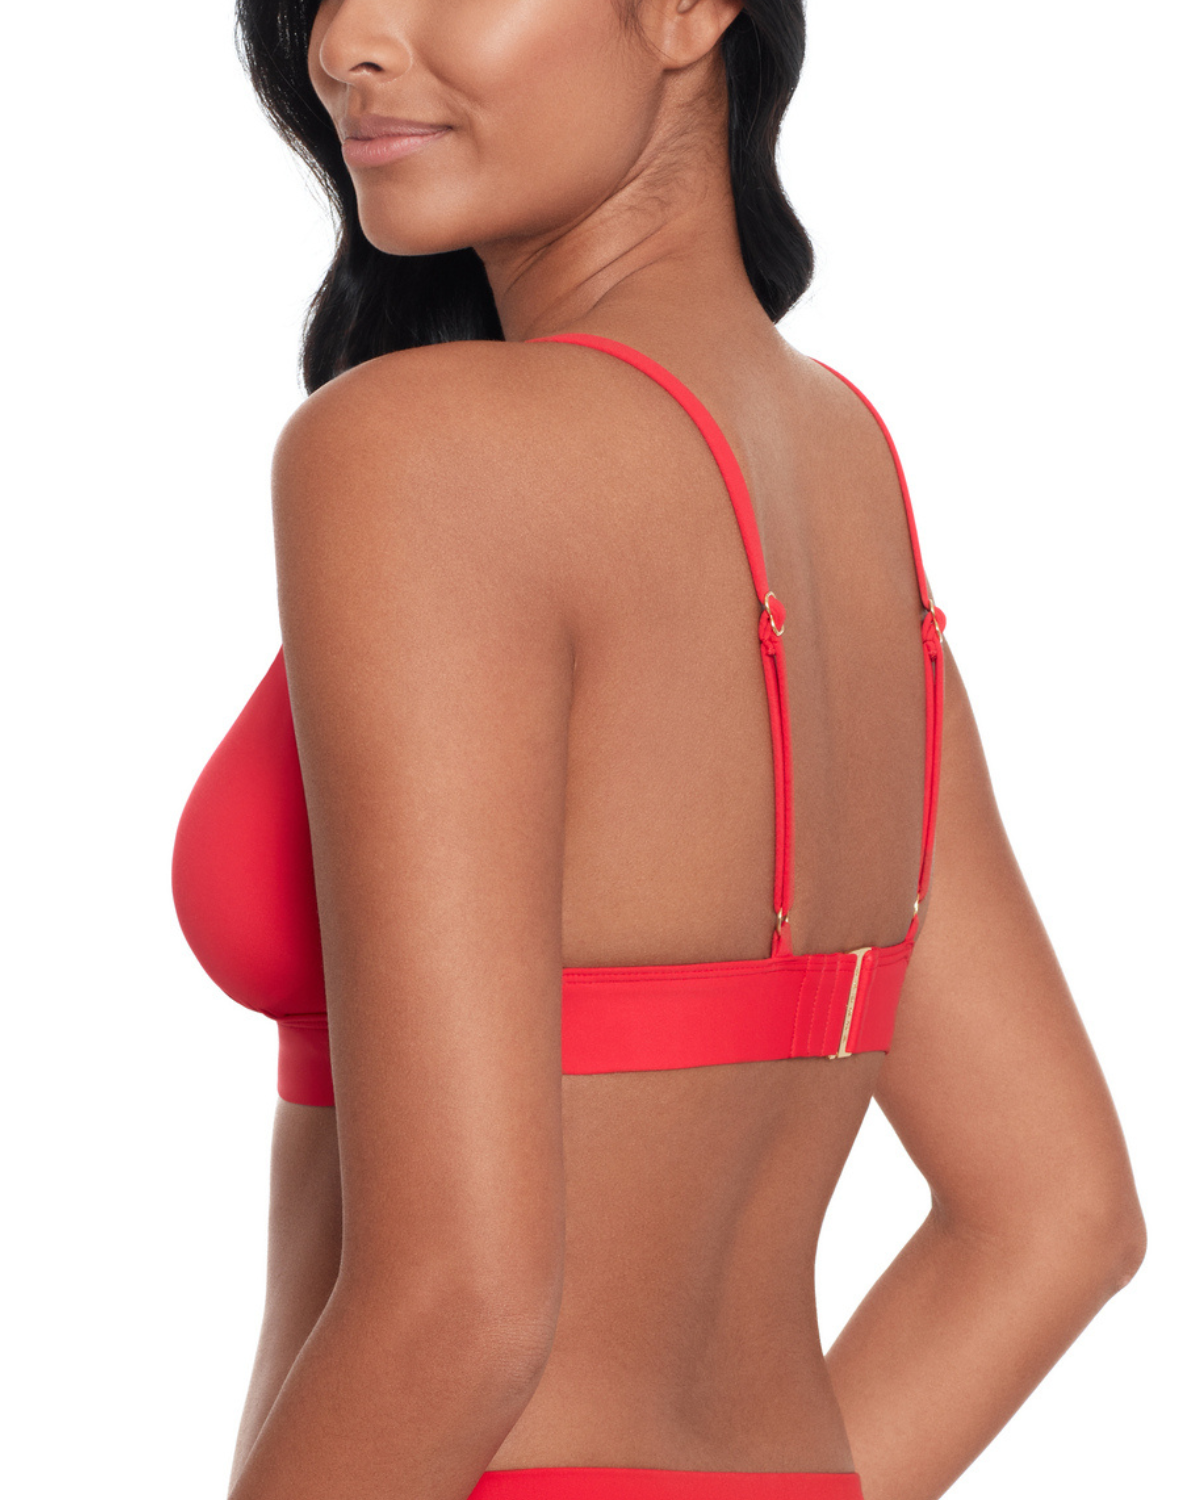 Model wearing a v-neck bikini top with adjustable straps in red